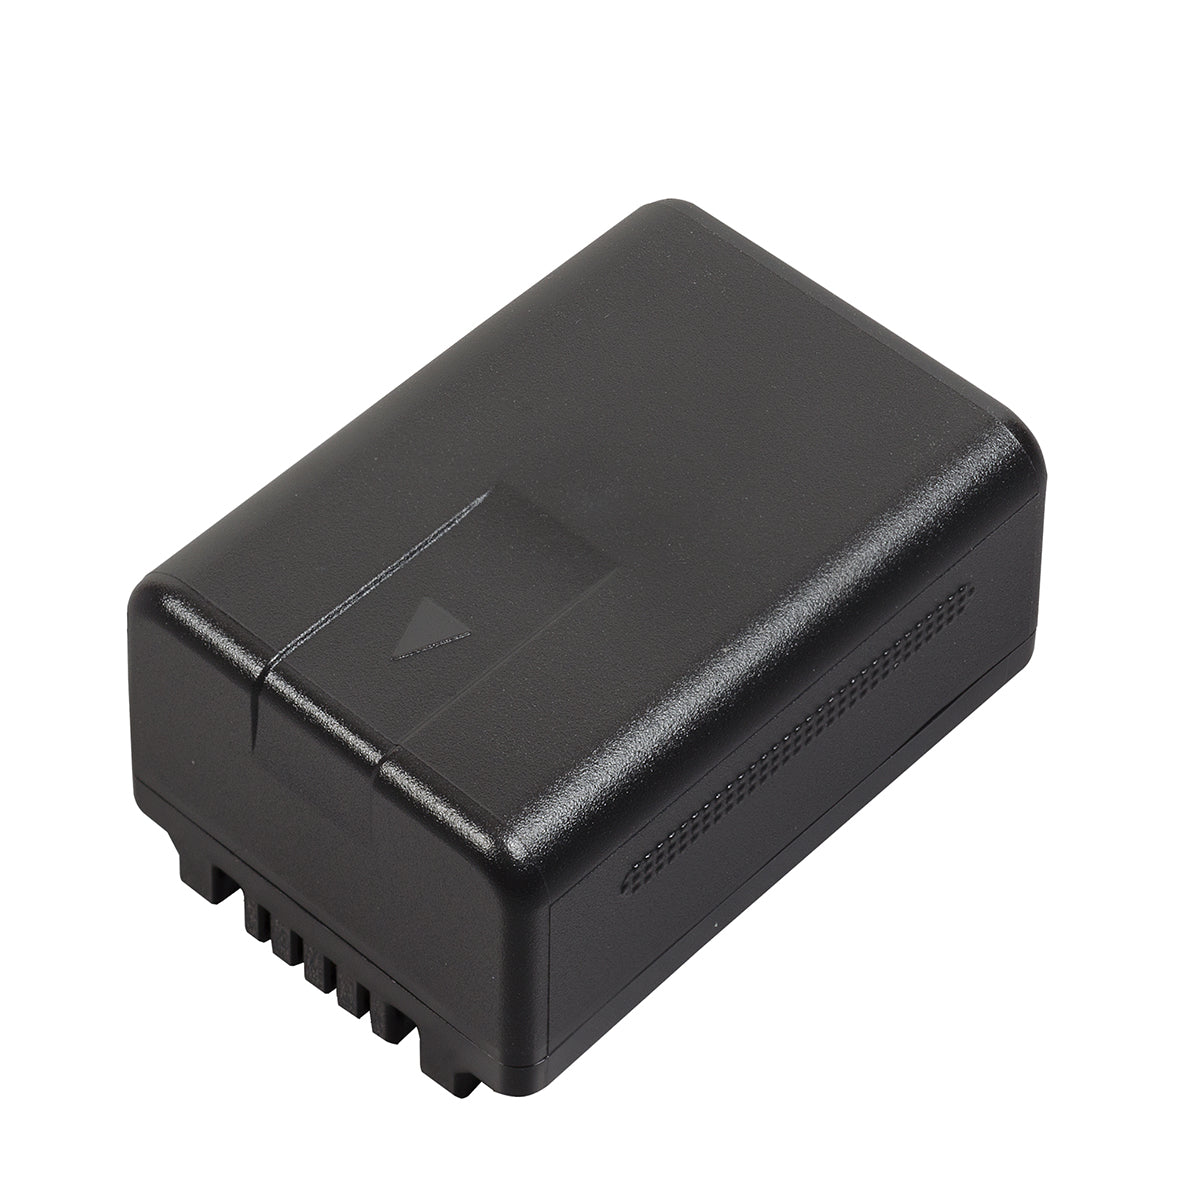 Rechargeable Lithium-Ion Battery - VW-VBT190